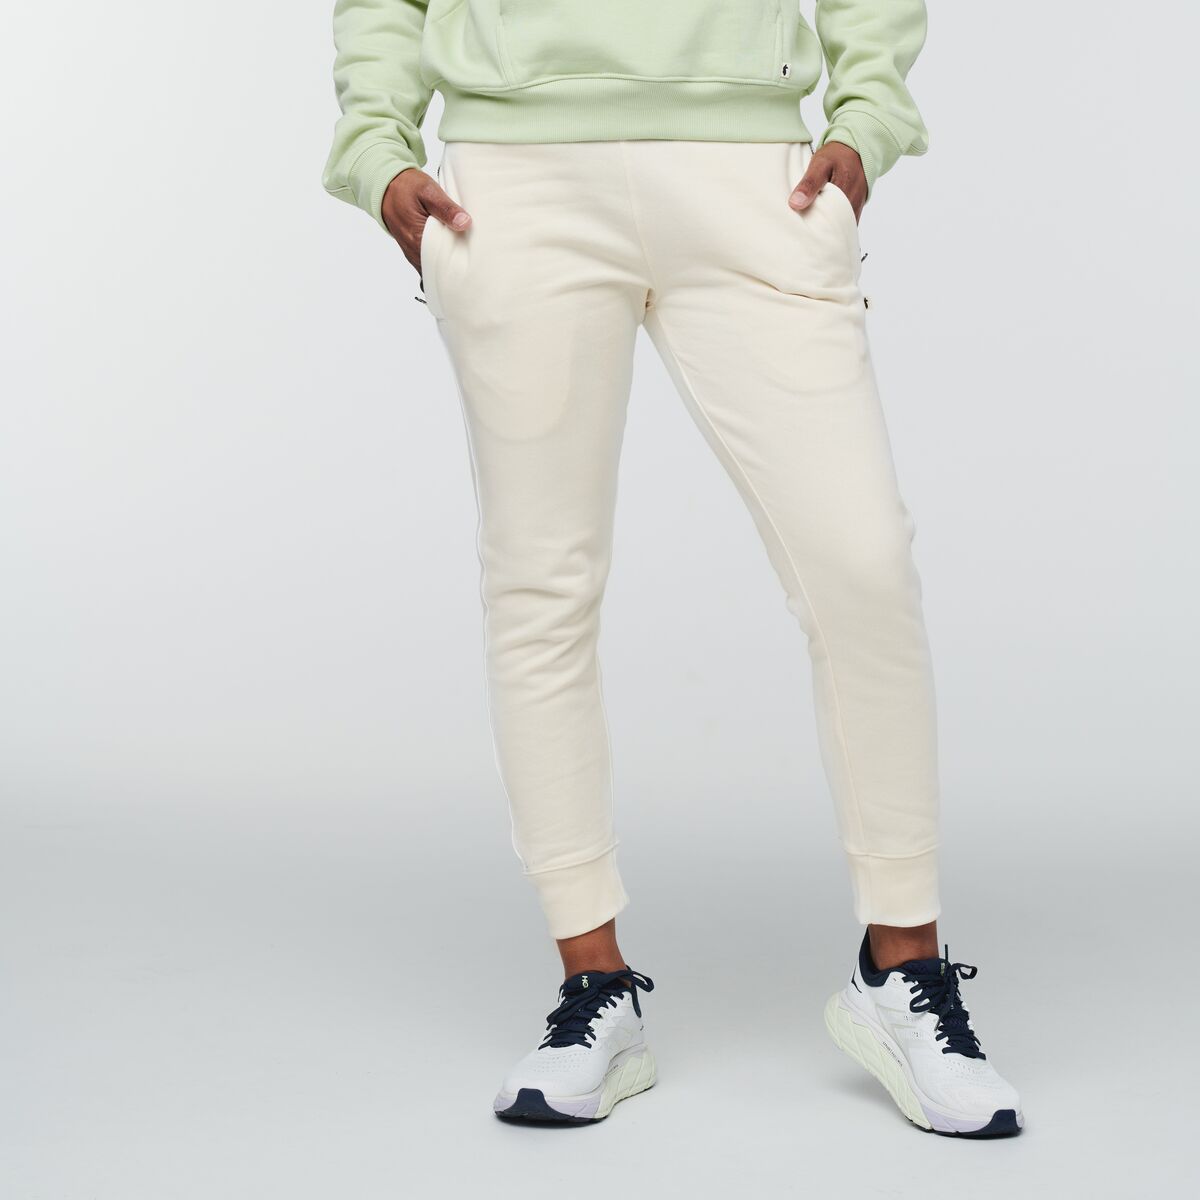 Cotopaxi - W's Organic Sweatpants - Organic cotton & Recycled polyester - Weekendbee - sustainable sportswear